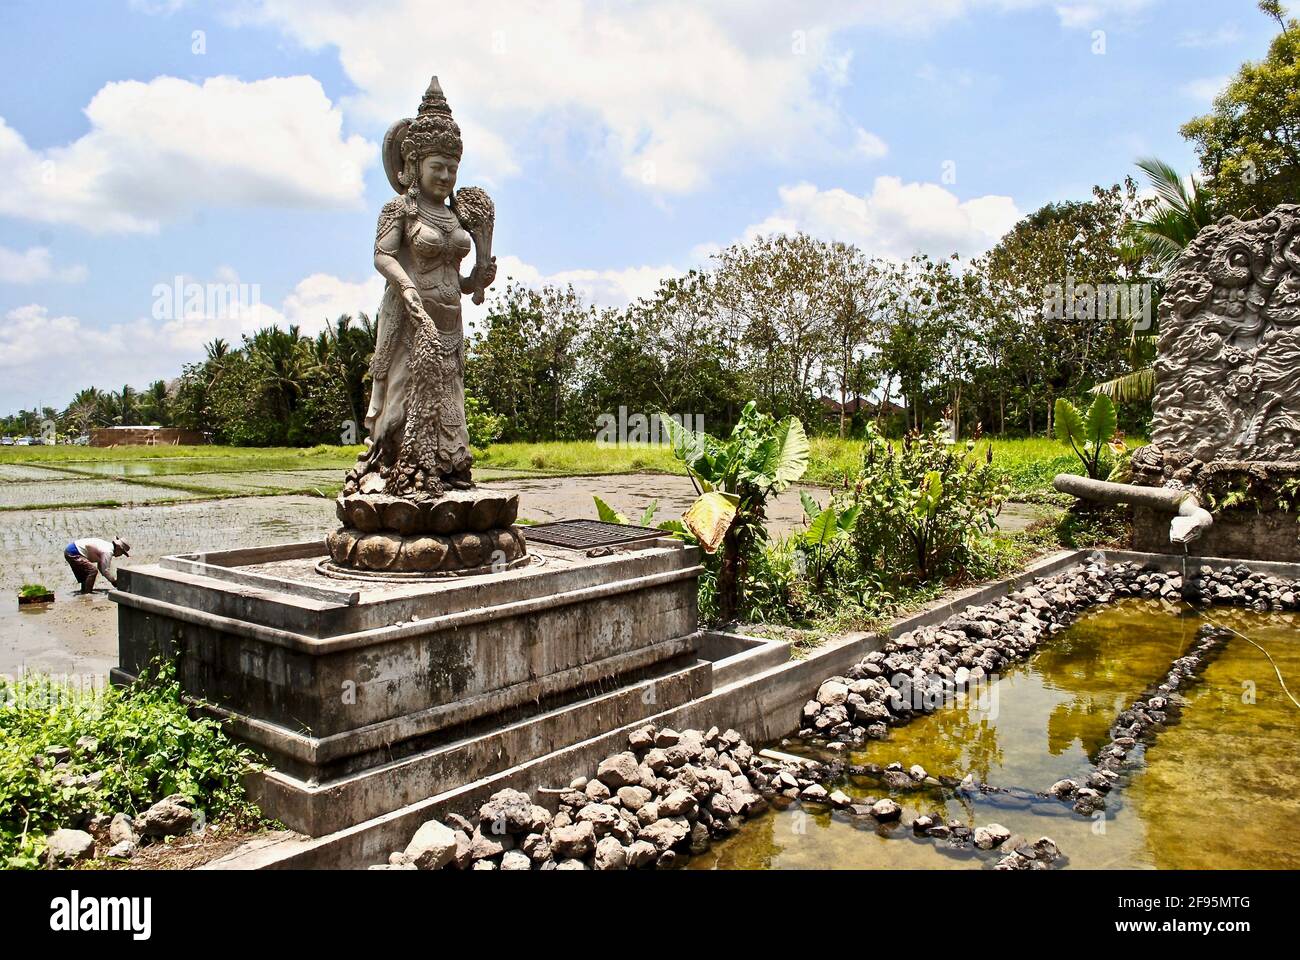 Balinese Hindu statue with rice terraces in background. Dewi Sri or Shridevi is the Javanese, Sundanese, and Balinese goddess of rice and fertility. Stock Photo